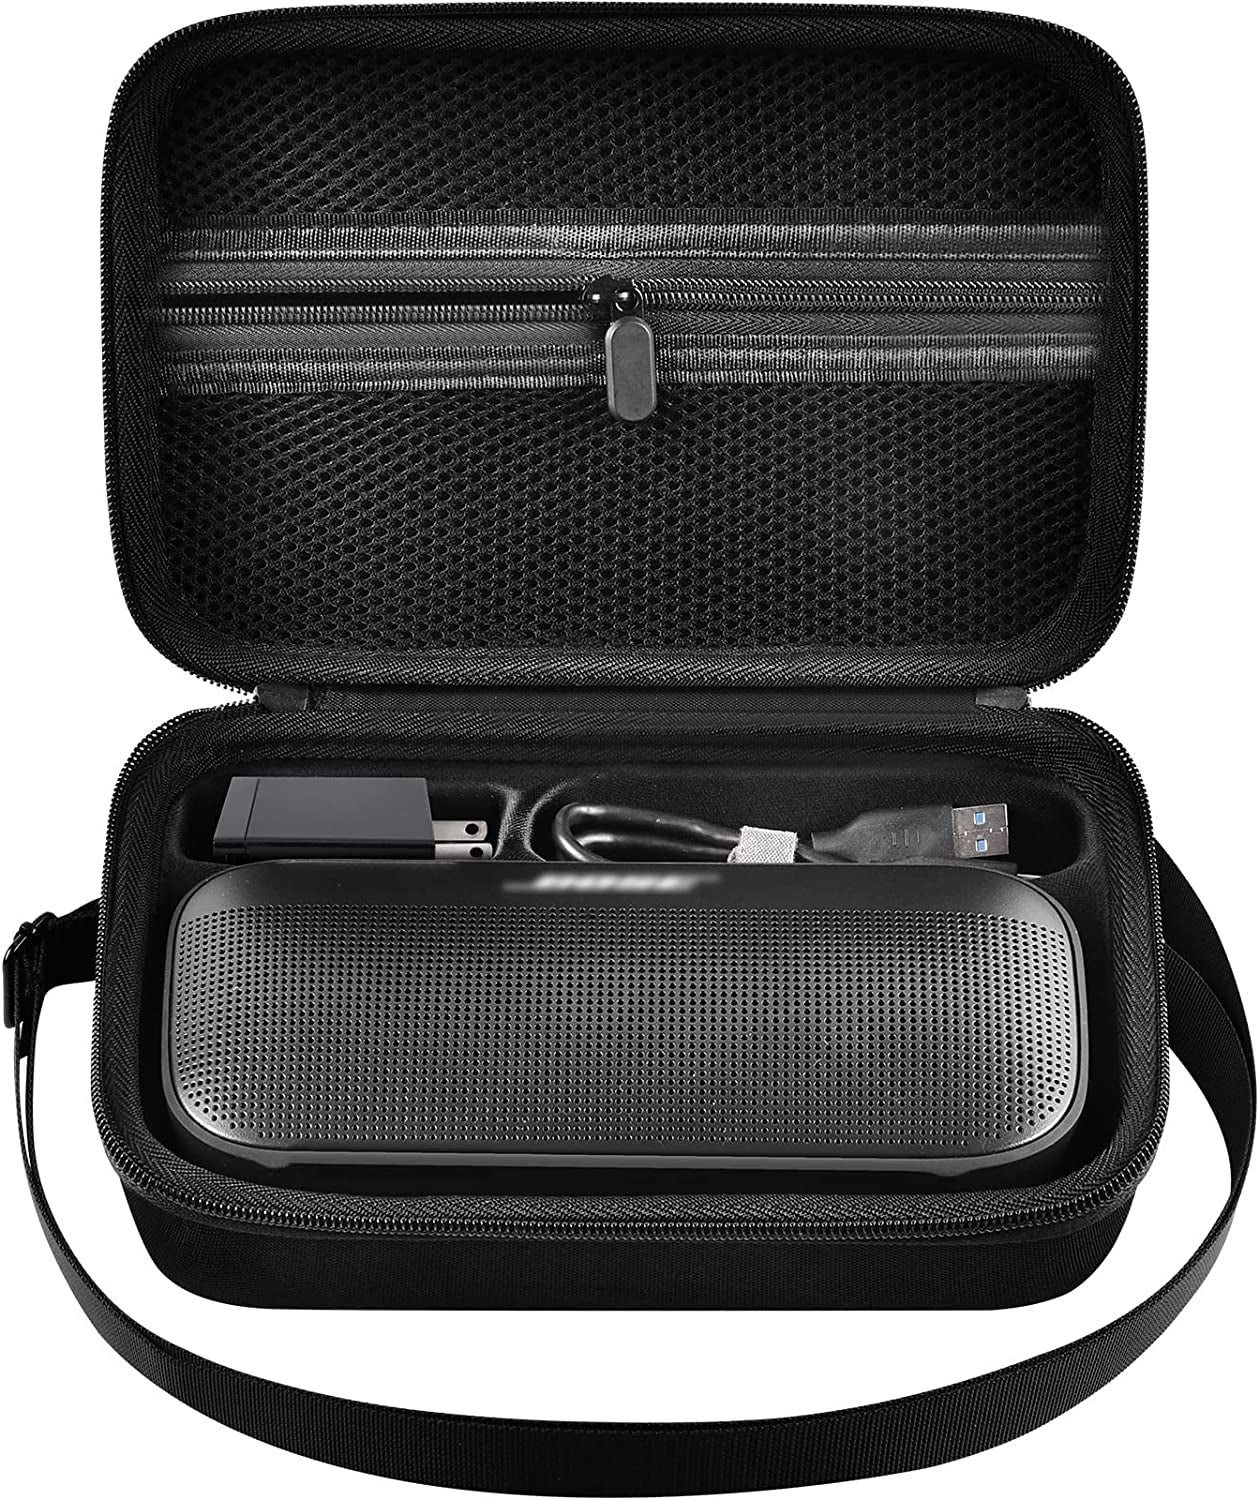 Case Compatible with Bose Soundlink Flex Bluetooth Portable Speaker, Carrying Travel Storage for Wireless Waterproof Speaker, Holder with Mesh Pocket for USB Charging Cable and Charger (Box Only)